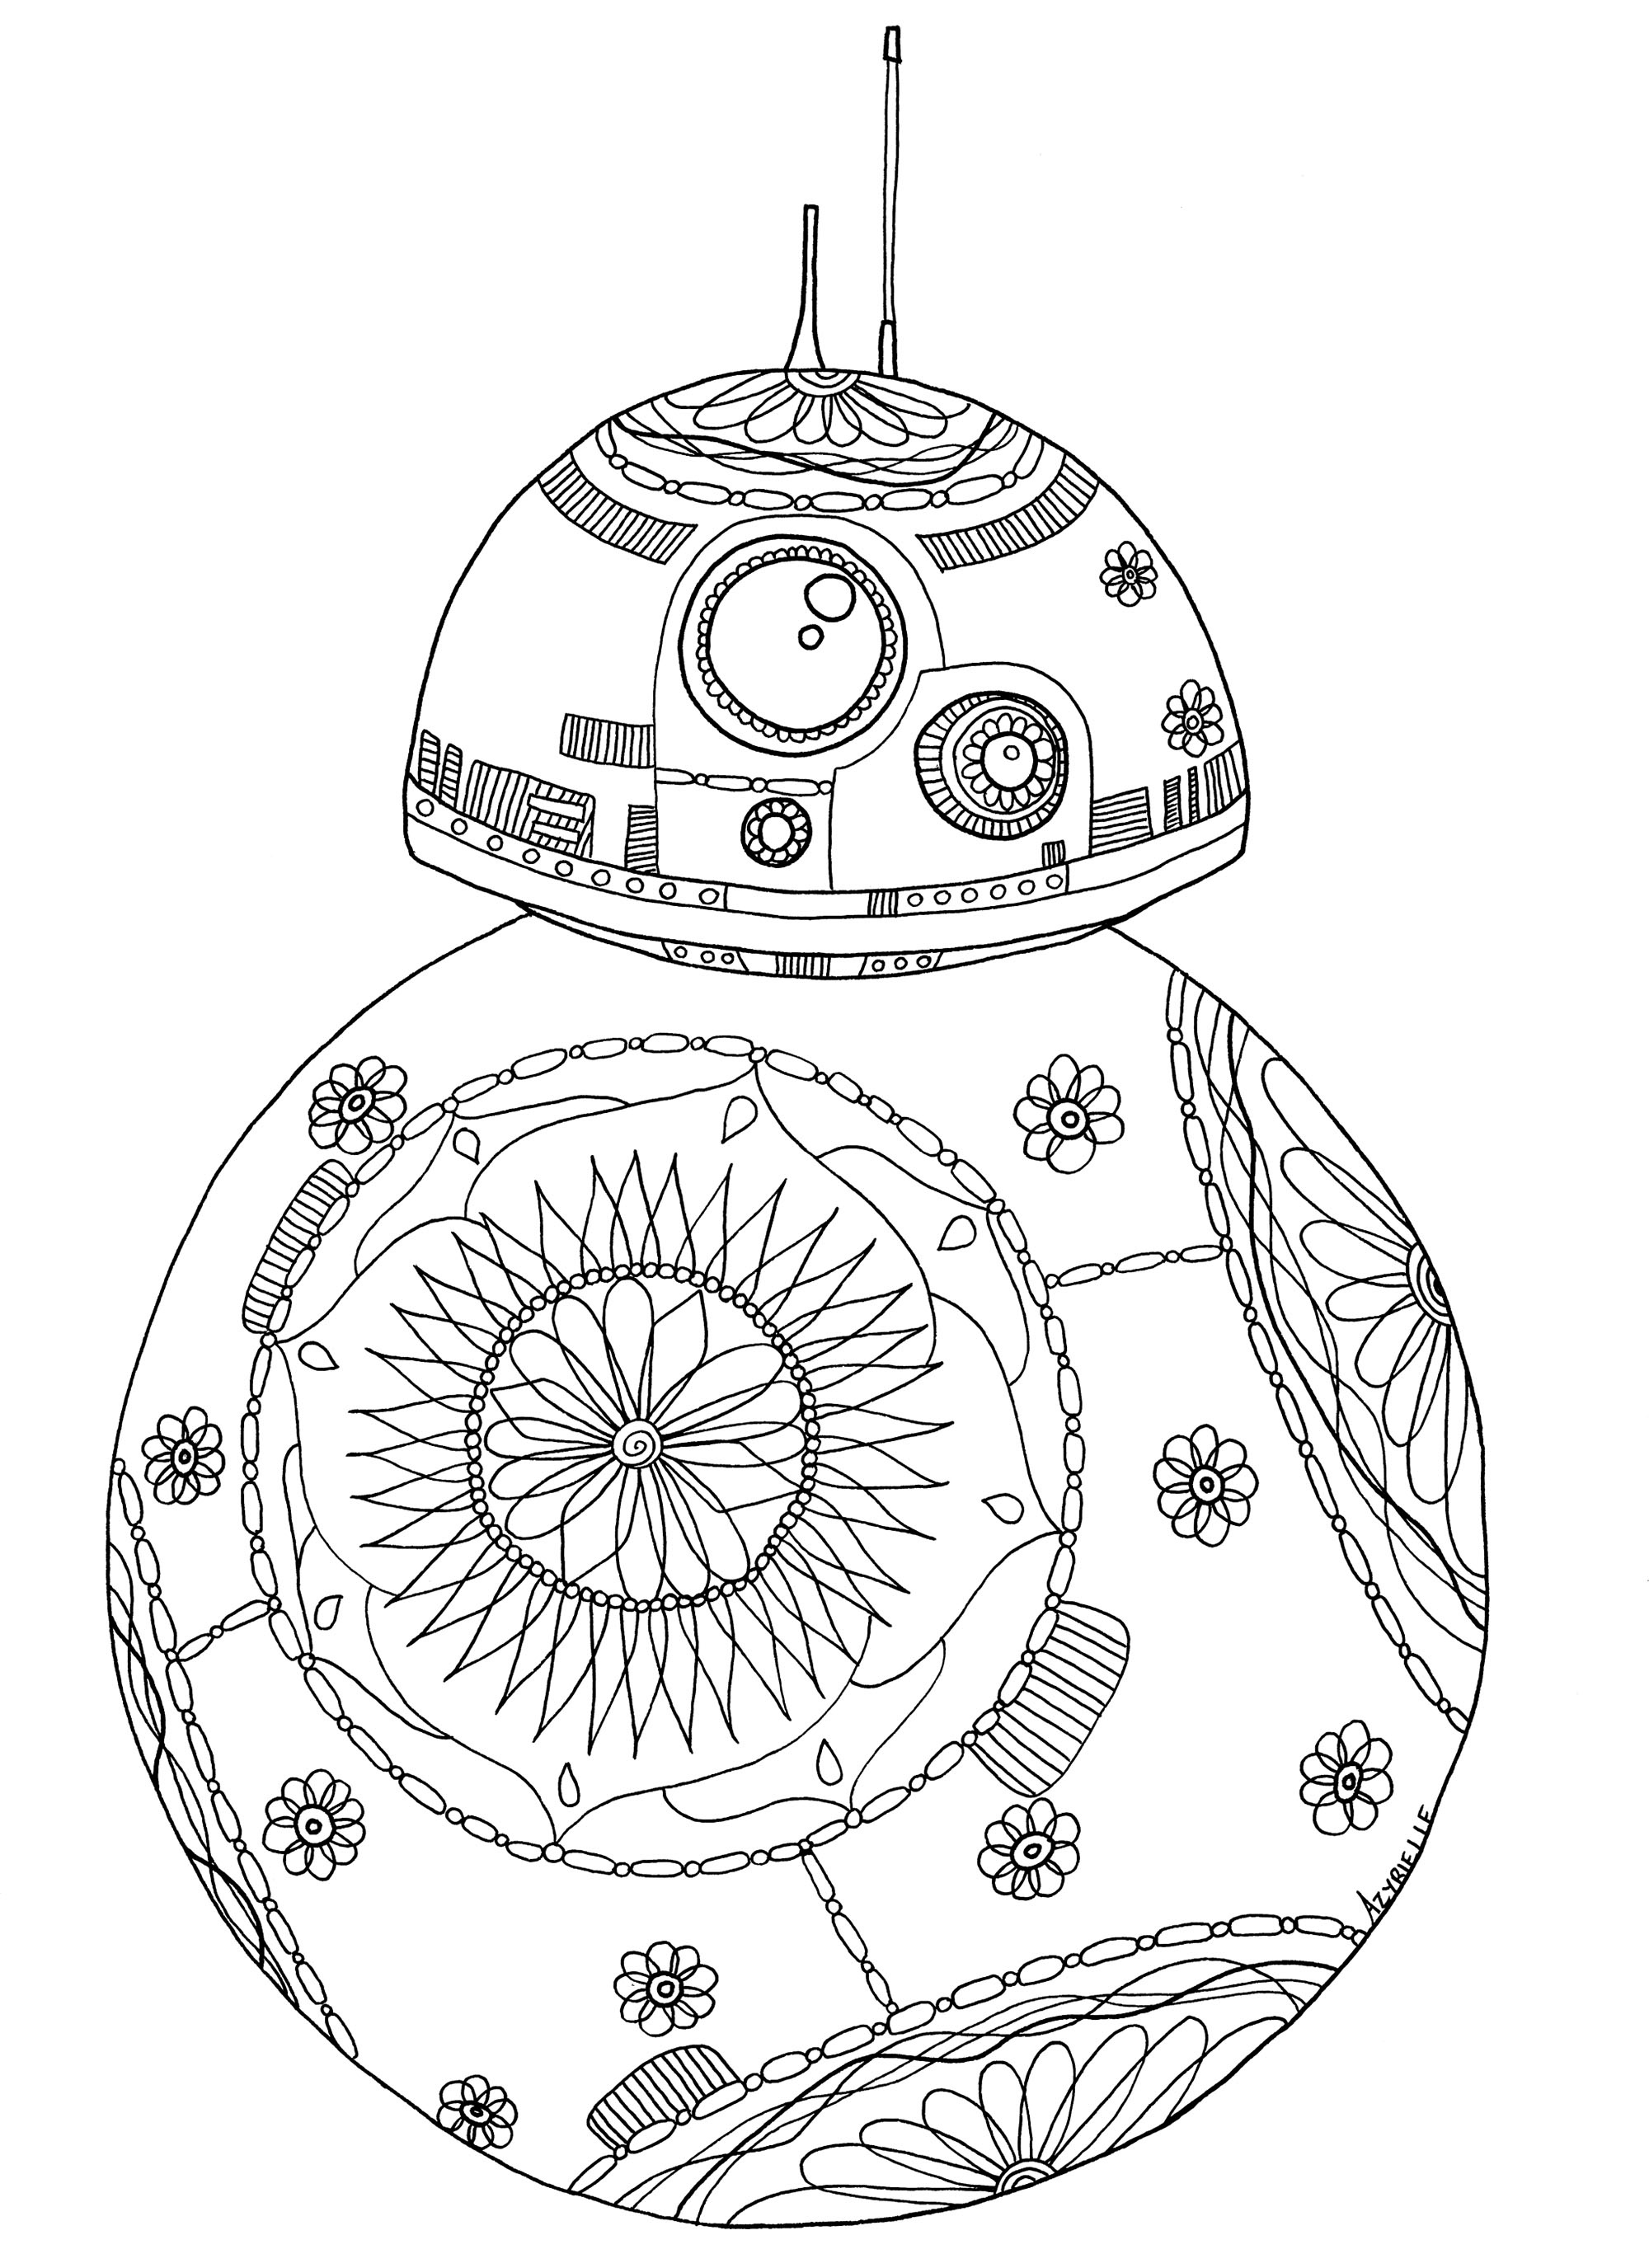 140+ Star Wars Coloring Pages Collection 133